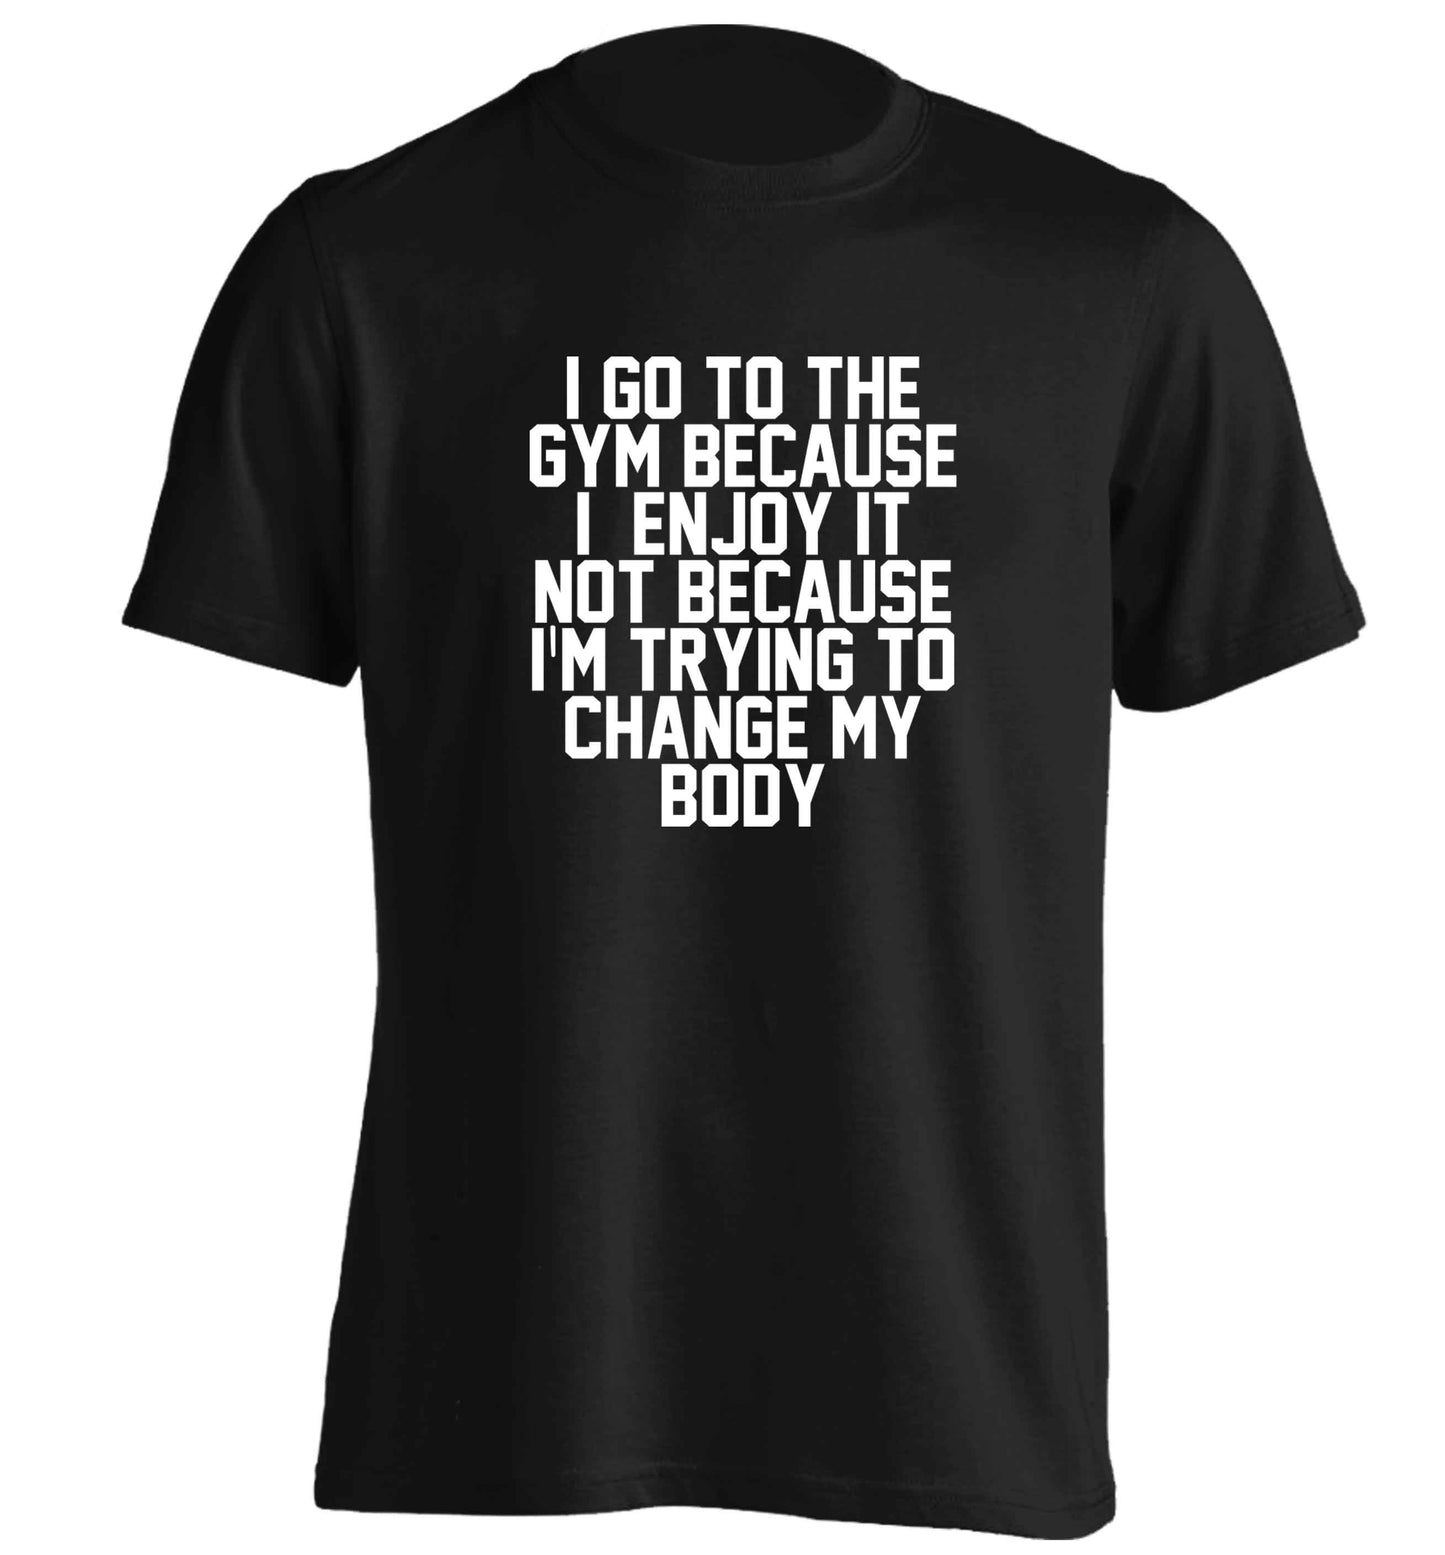 I go to the gym because I enjoy it not because I'm trying to change my body adults unisex black Tshirt 2XL